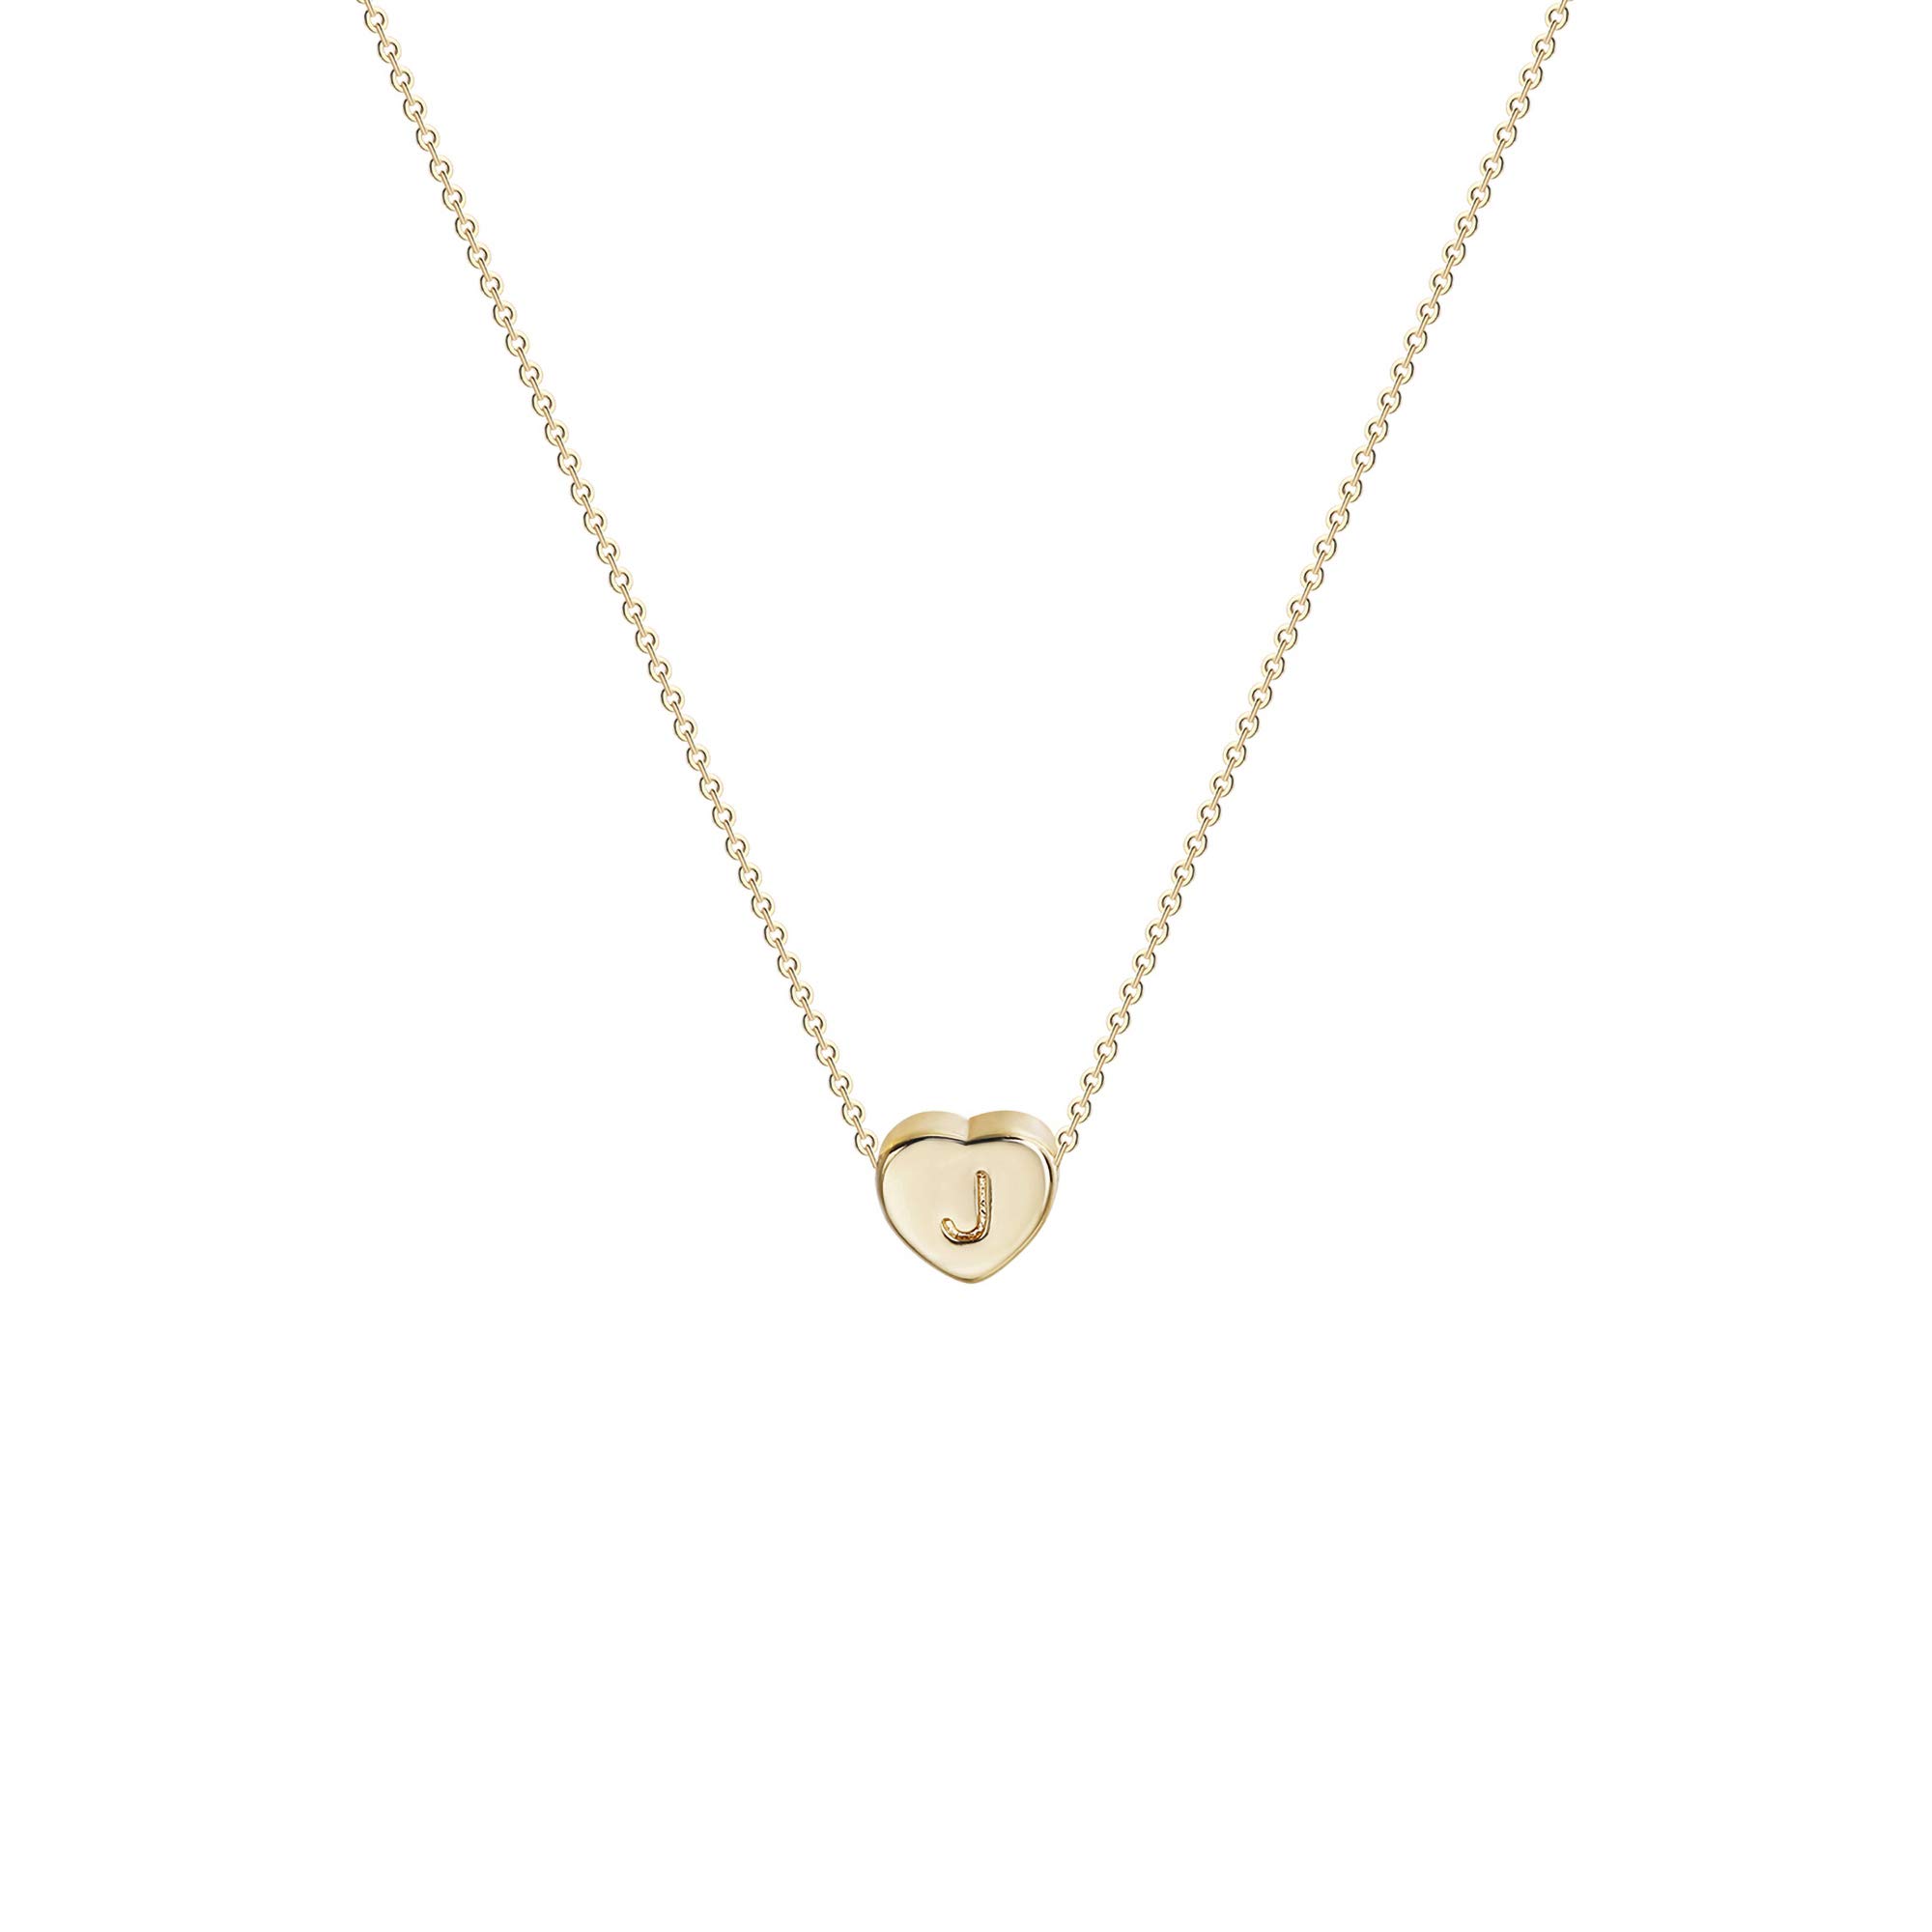 Tiny Gold Initial Heart Necklace-14K Gold Filled Handmade